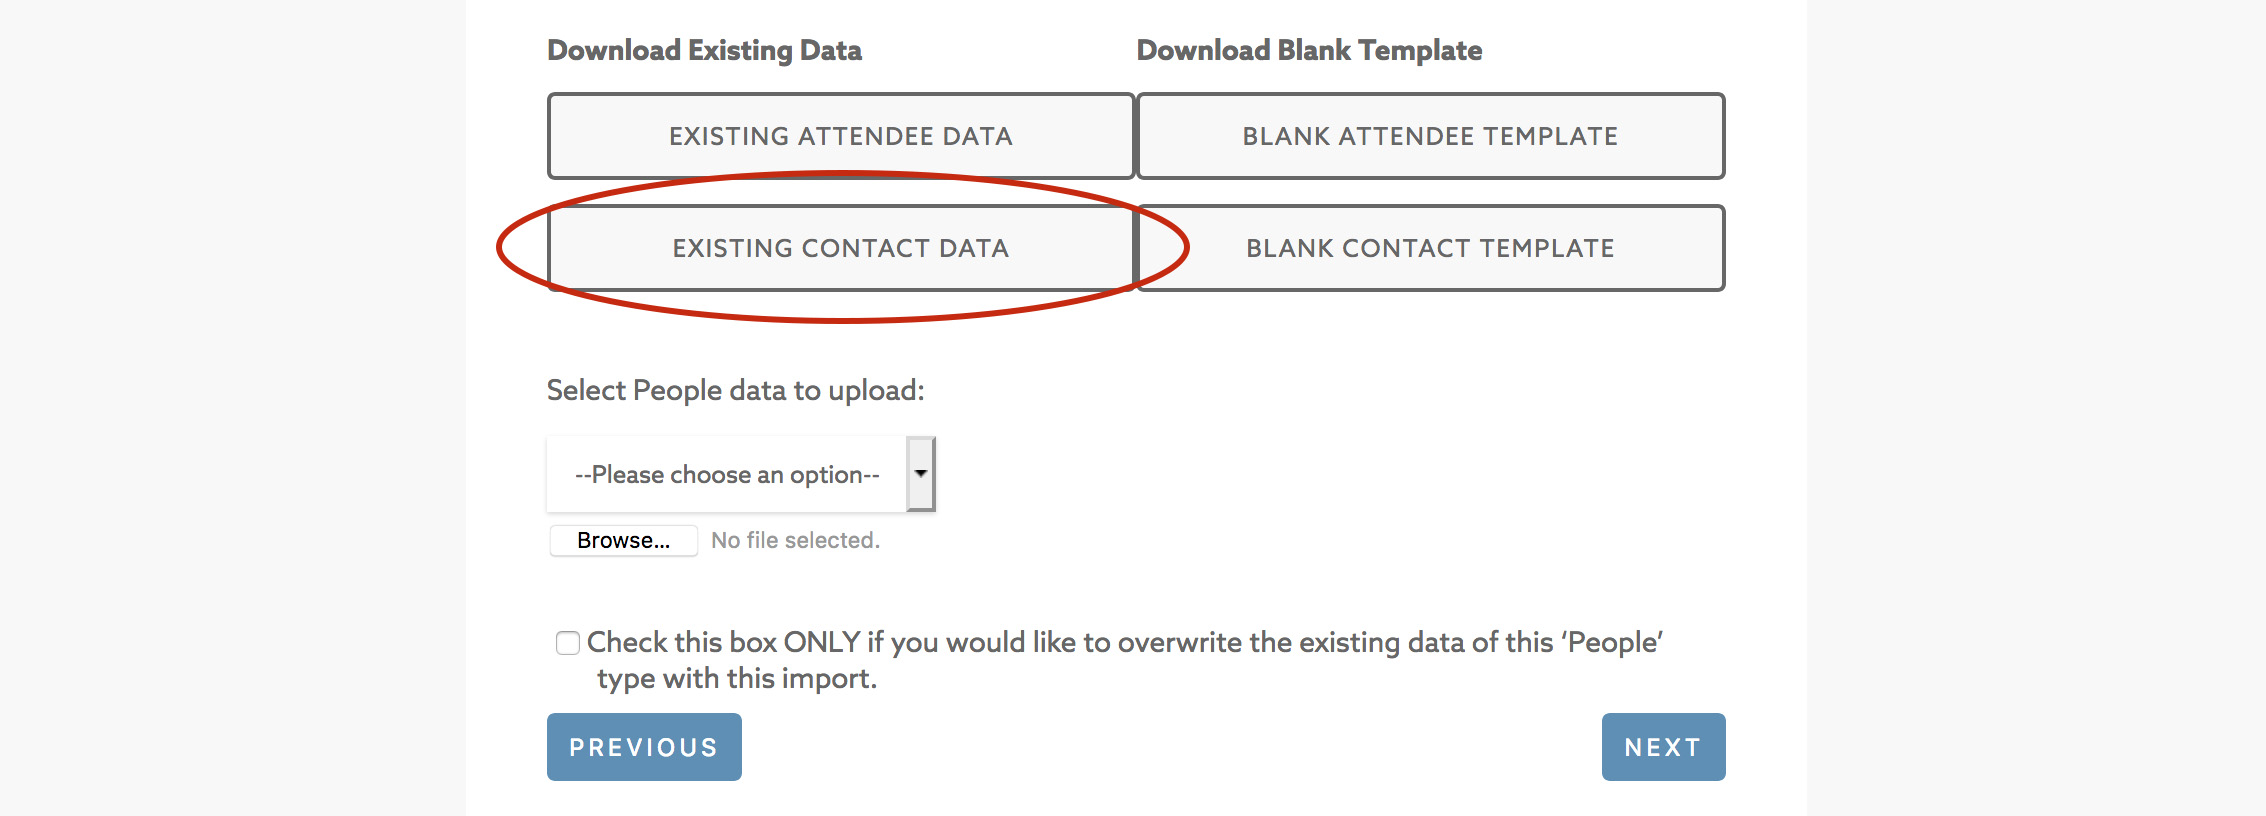 Select Existing Contact Data template